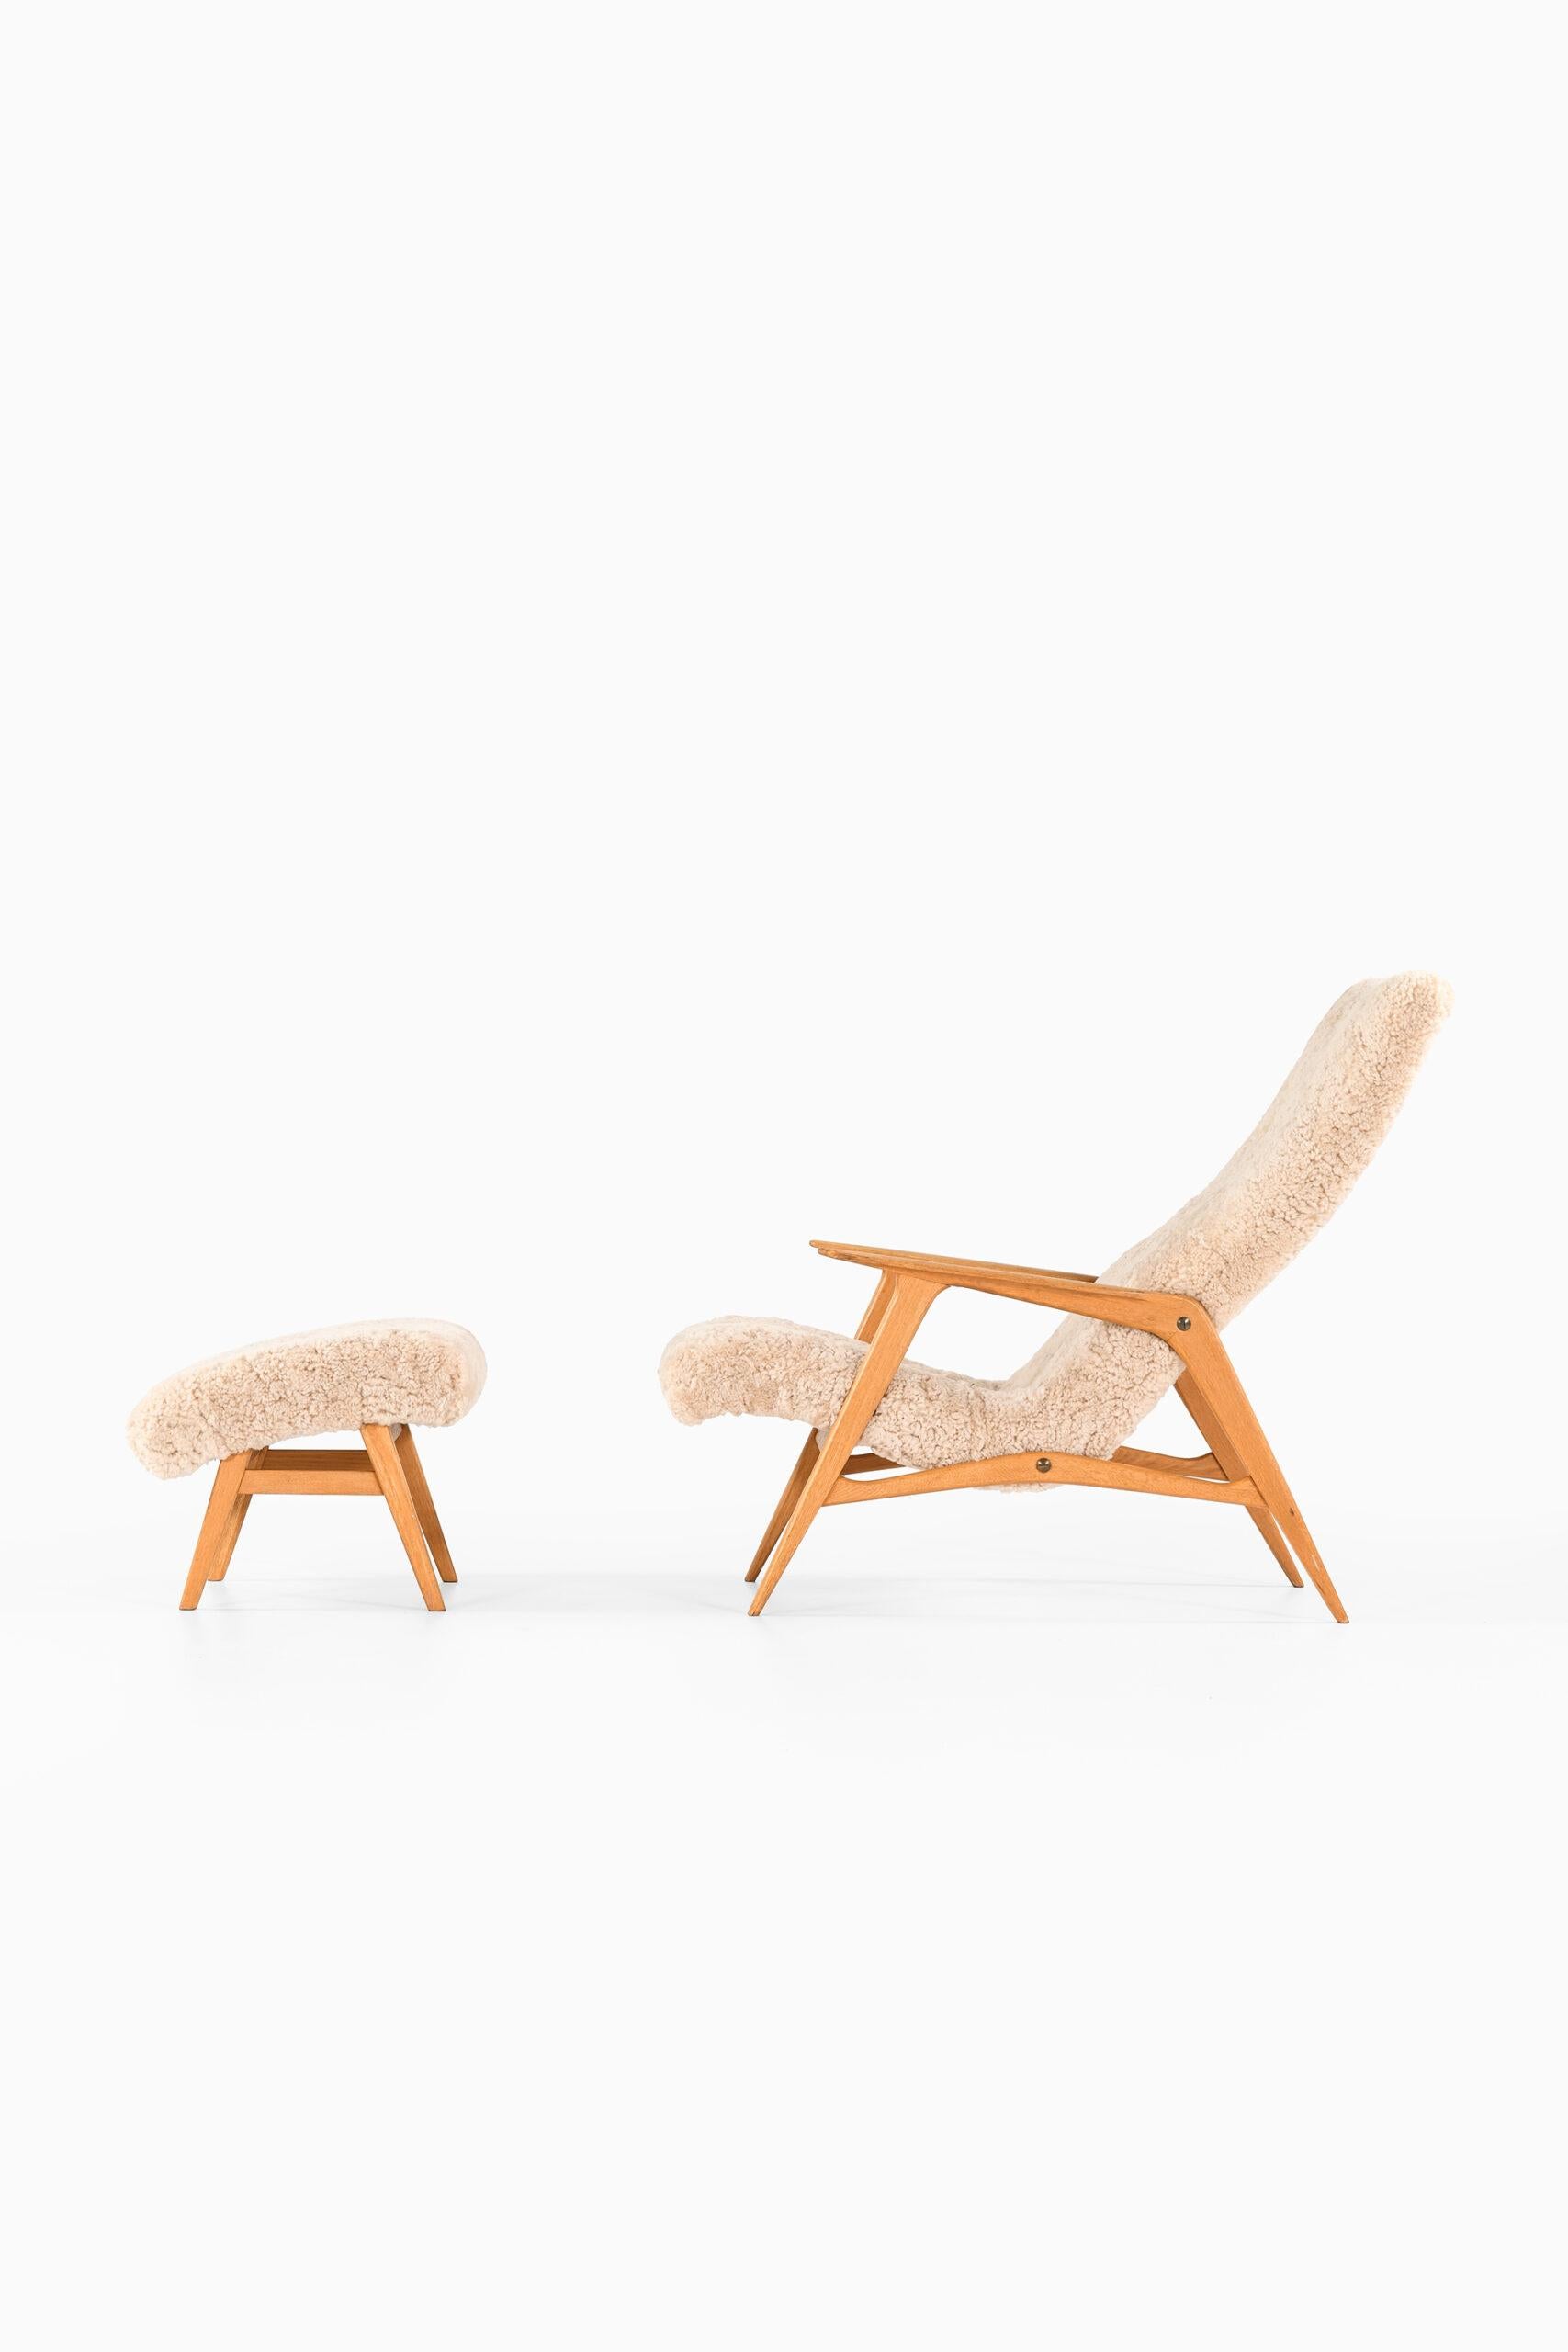 Rare easy chair with stool model Siesta by unknown designer. Produced by JIO Möbler in Sweden.
Dimensions (W x D x H): 63.5 x 115 x 93 cm, SH: 33 cm.
Dimensions stool (W x D x H): 58 x 50 x 39 cm.